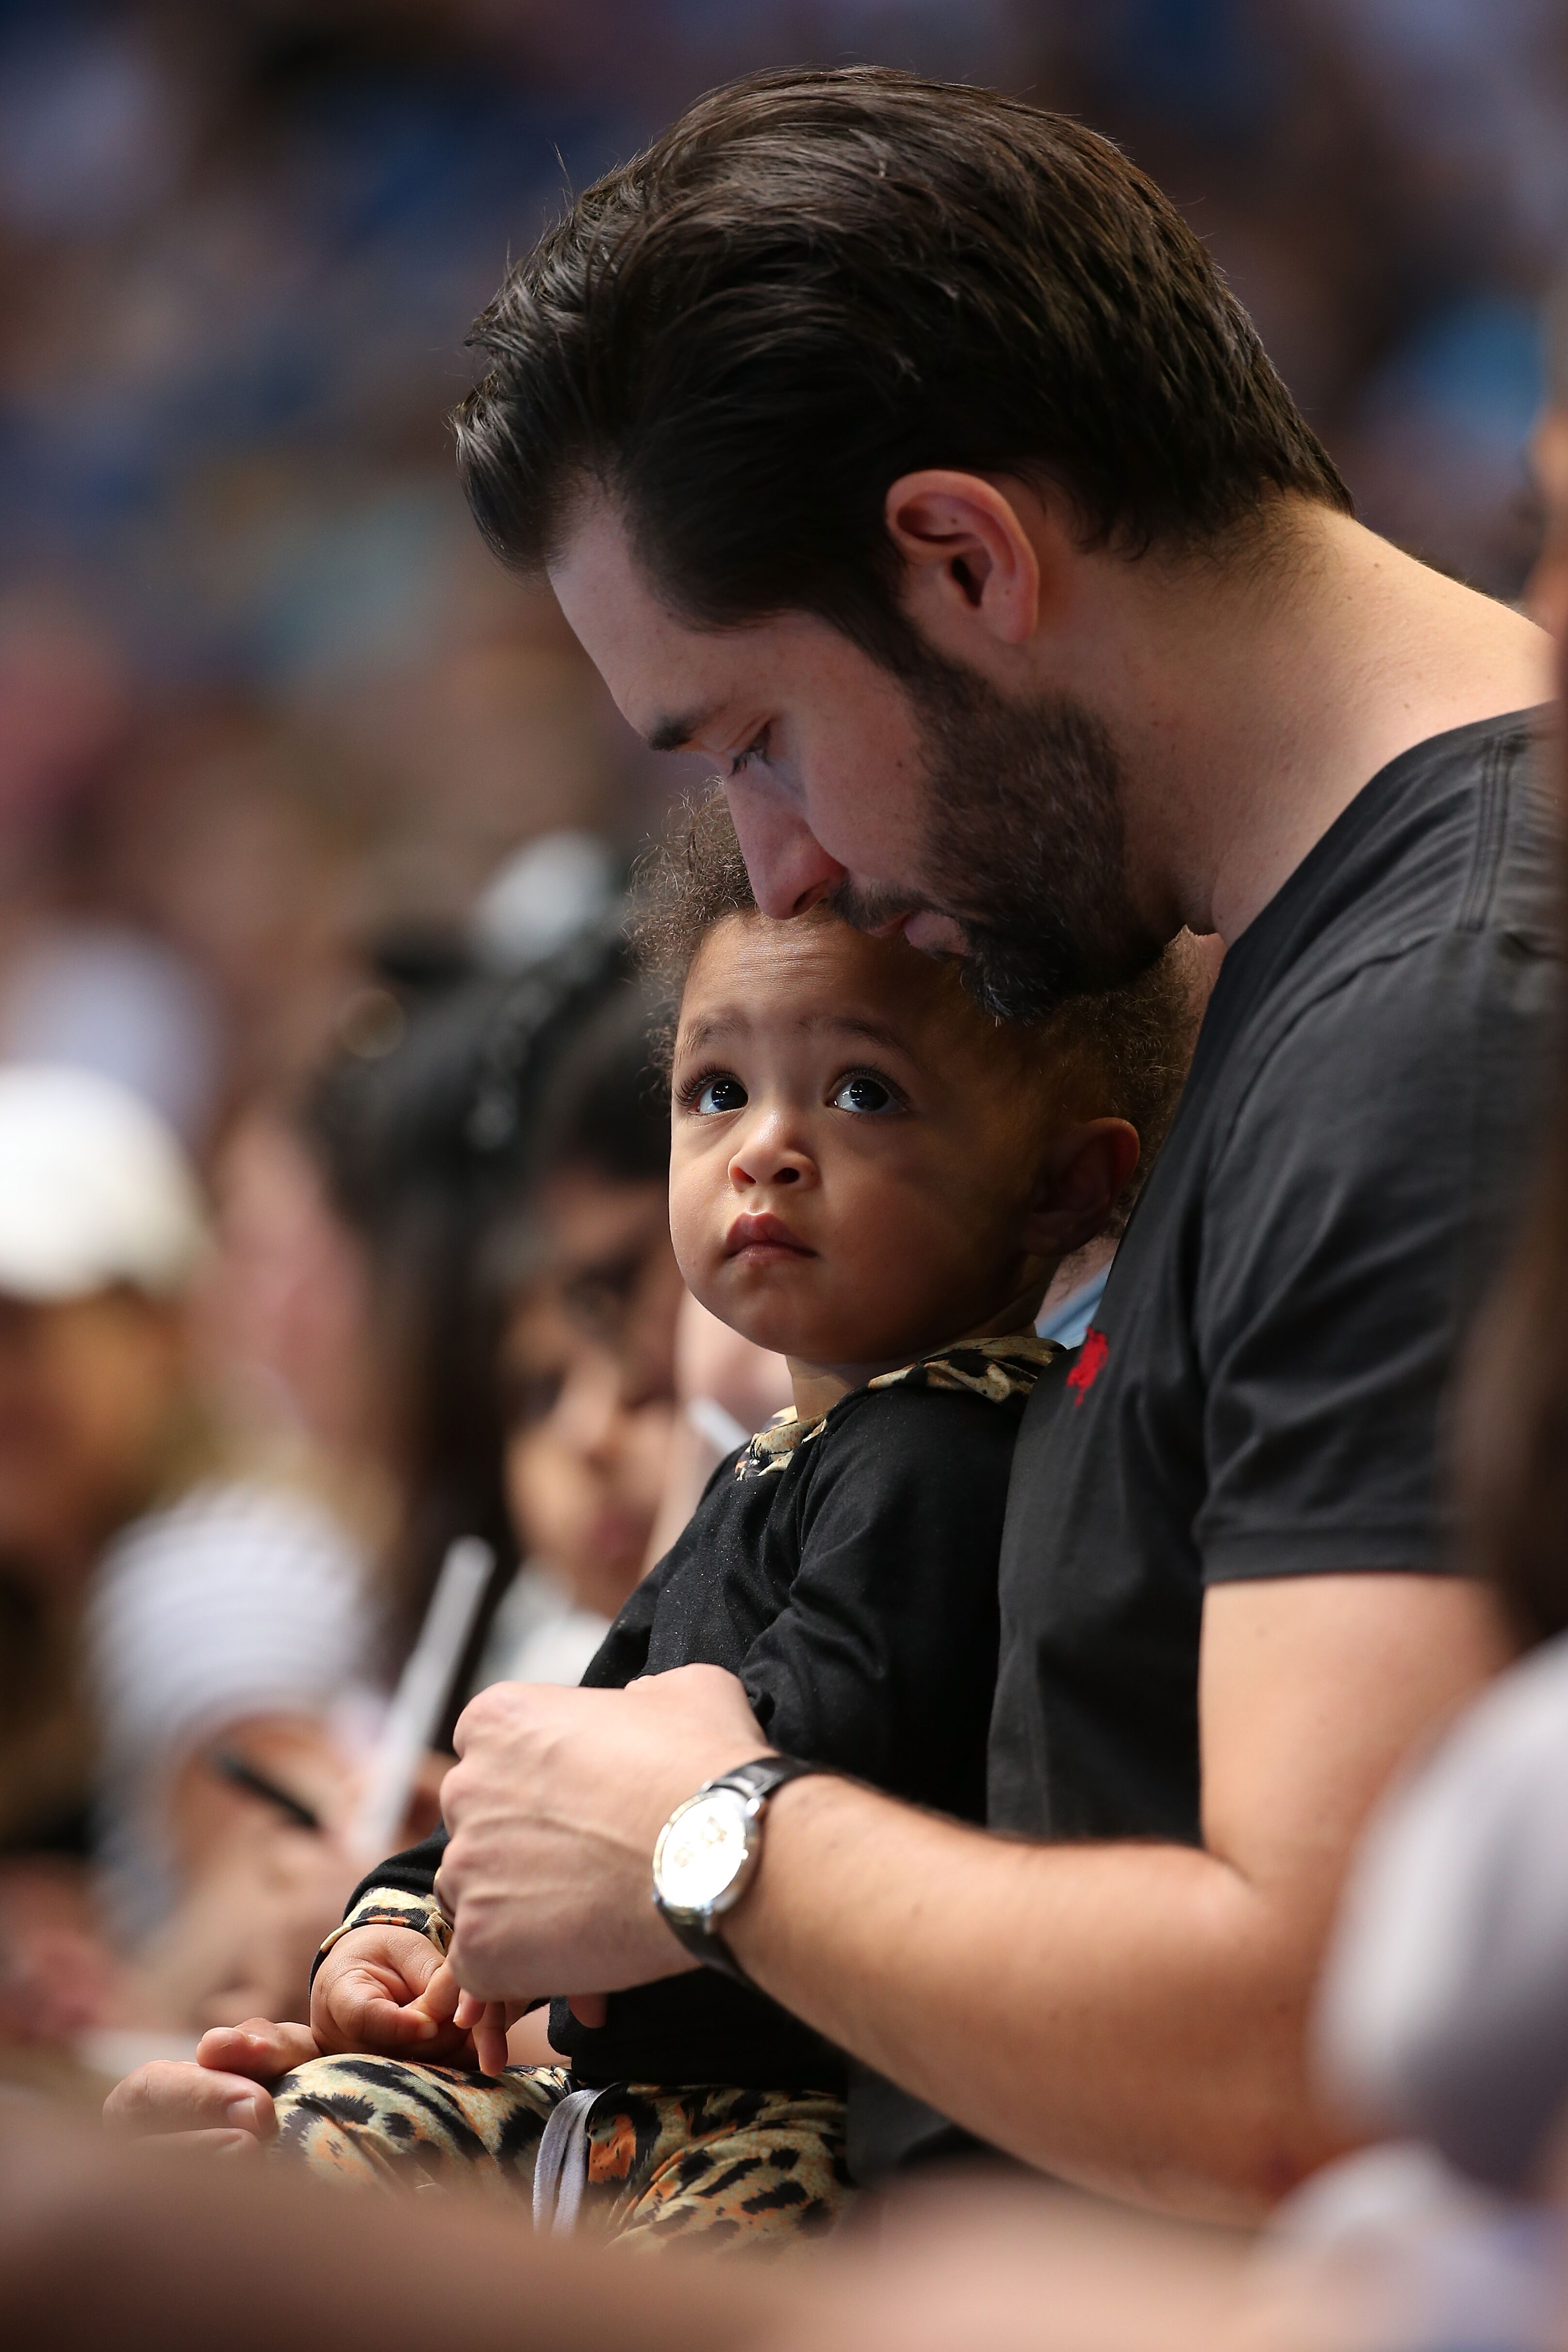 Serena Williams' husband Alexis Ohanian with their daughter Alexis Olympia Ohanian Jr. at RAC Arena on January 03, 2019. | Photo: Getty Images